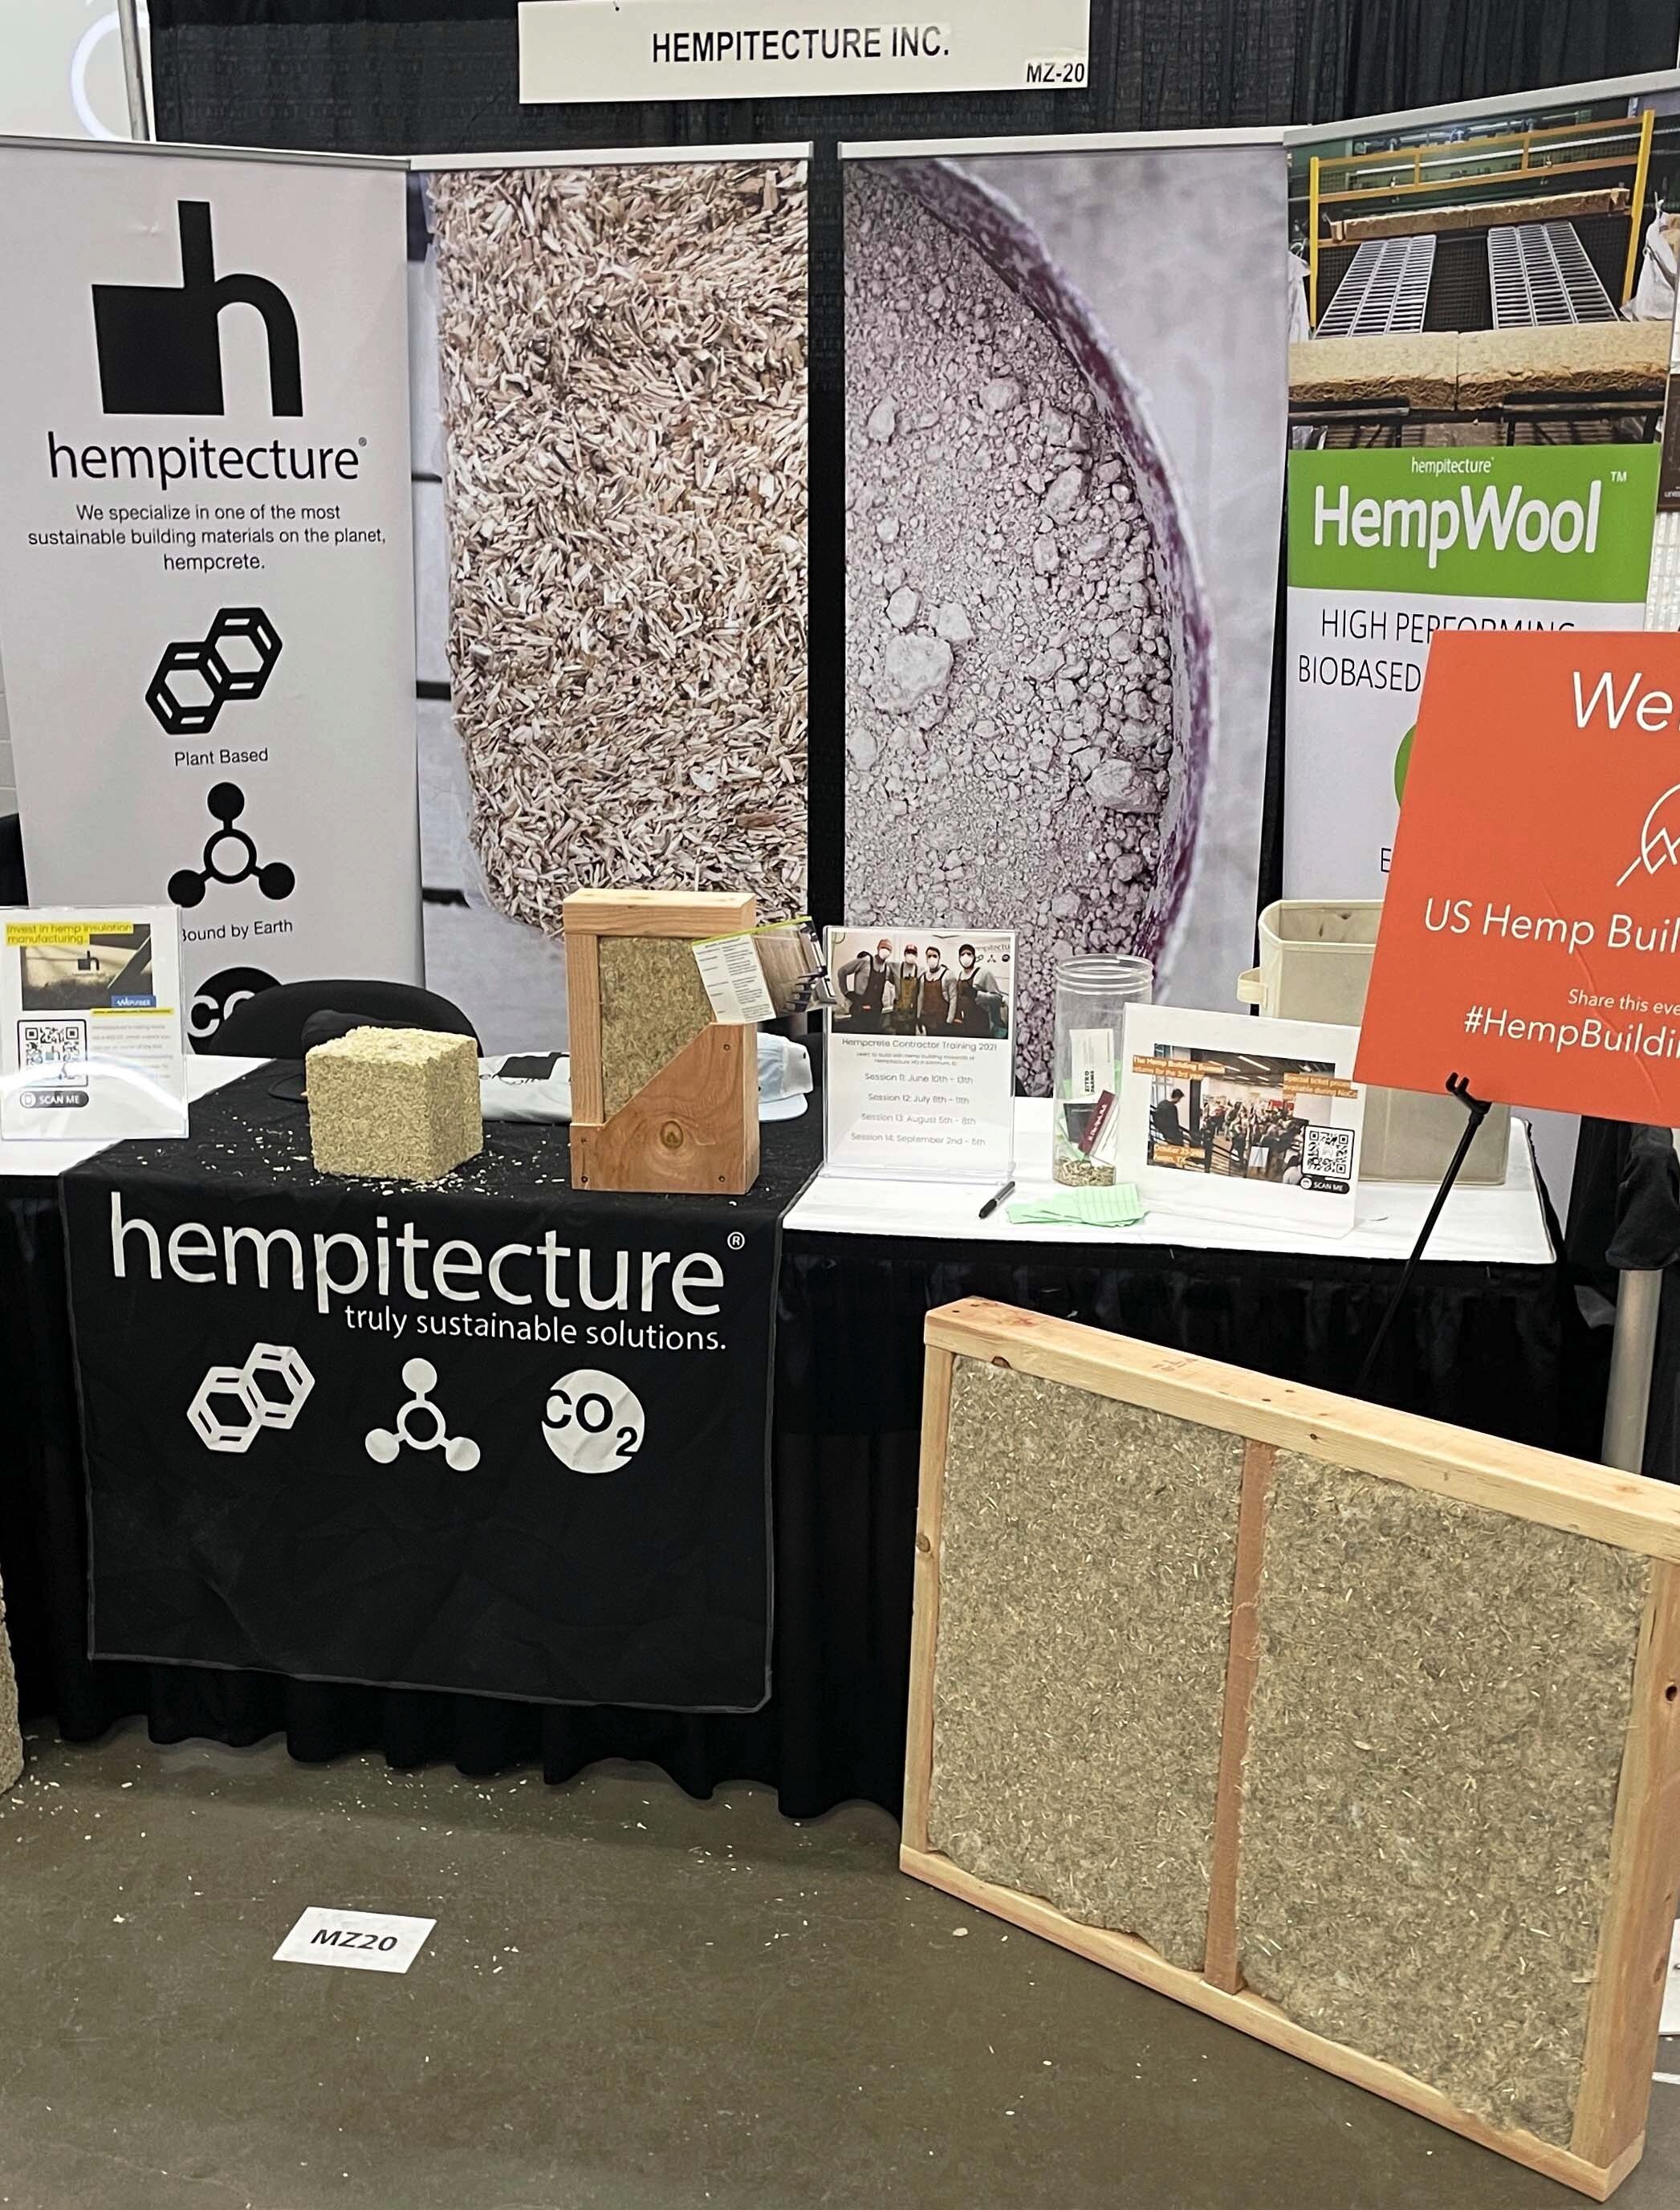 Hempitecture booth at the NoCo Hemp Expo shows off their hempcrete and hemp insulation building materials. Photo by Matthew Farson.